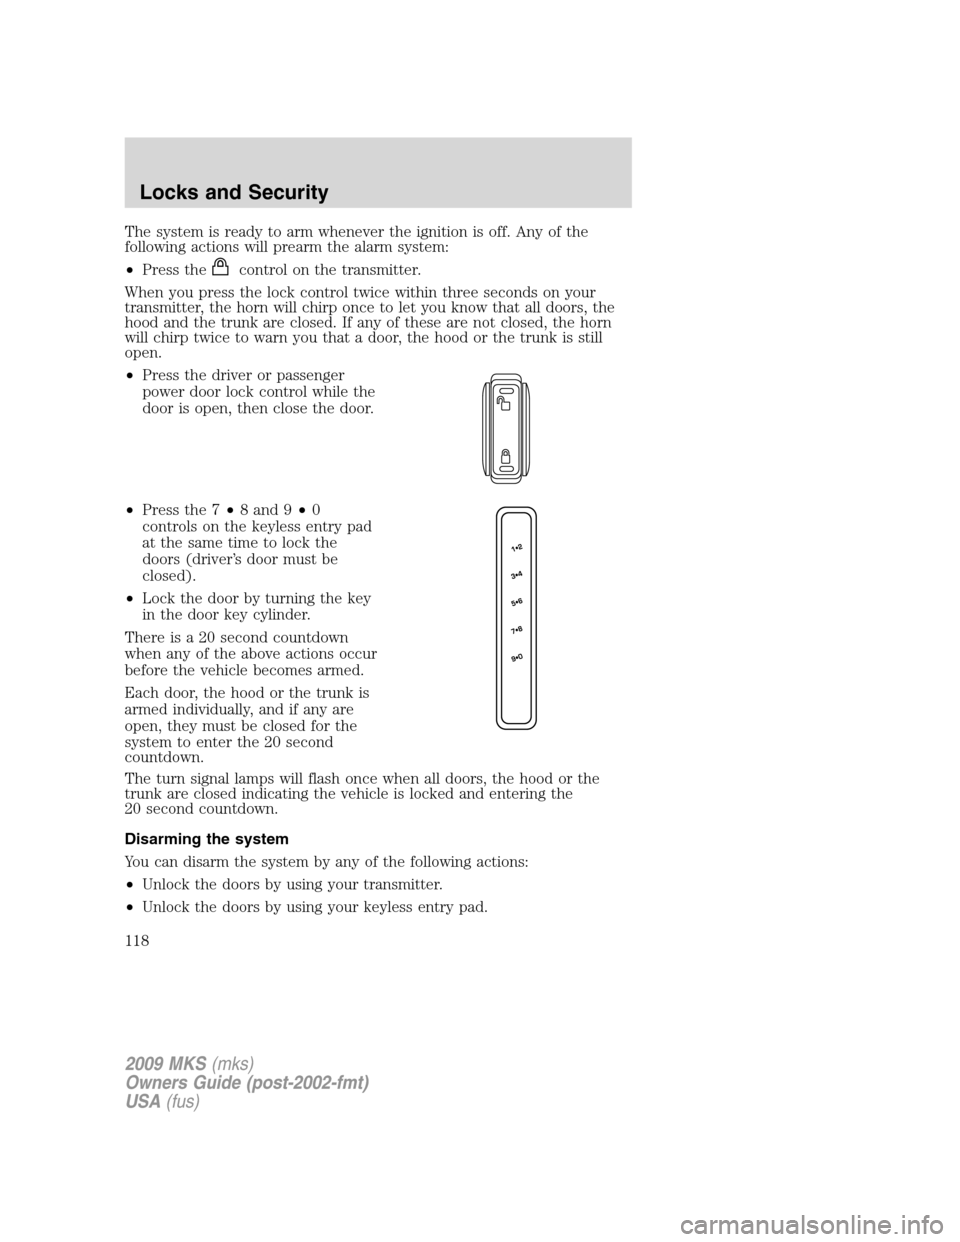 LINCOLN MKS 2009 User Guide The system is ready to arm whenever the ignition is off. Any of the
following actions will prearm the alarm system:
•Press the
control on the transmitter.
When you press the lock control twice withi